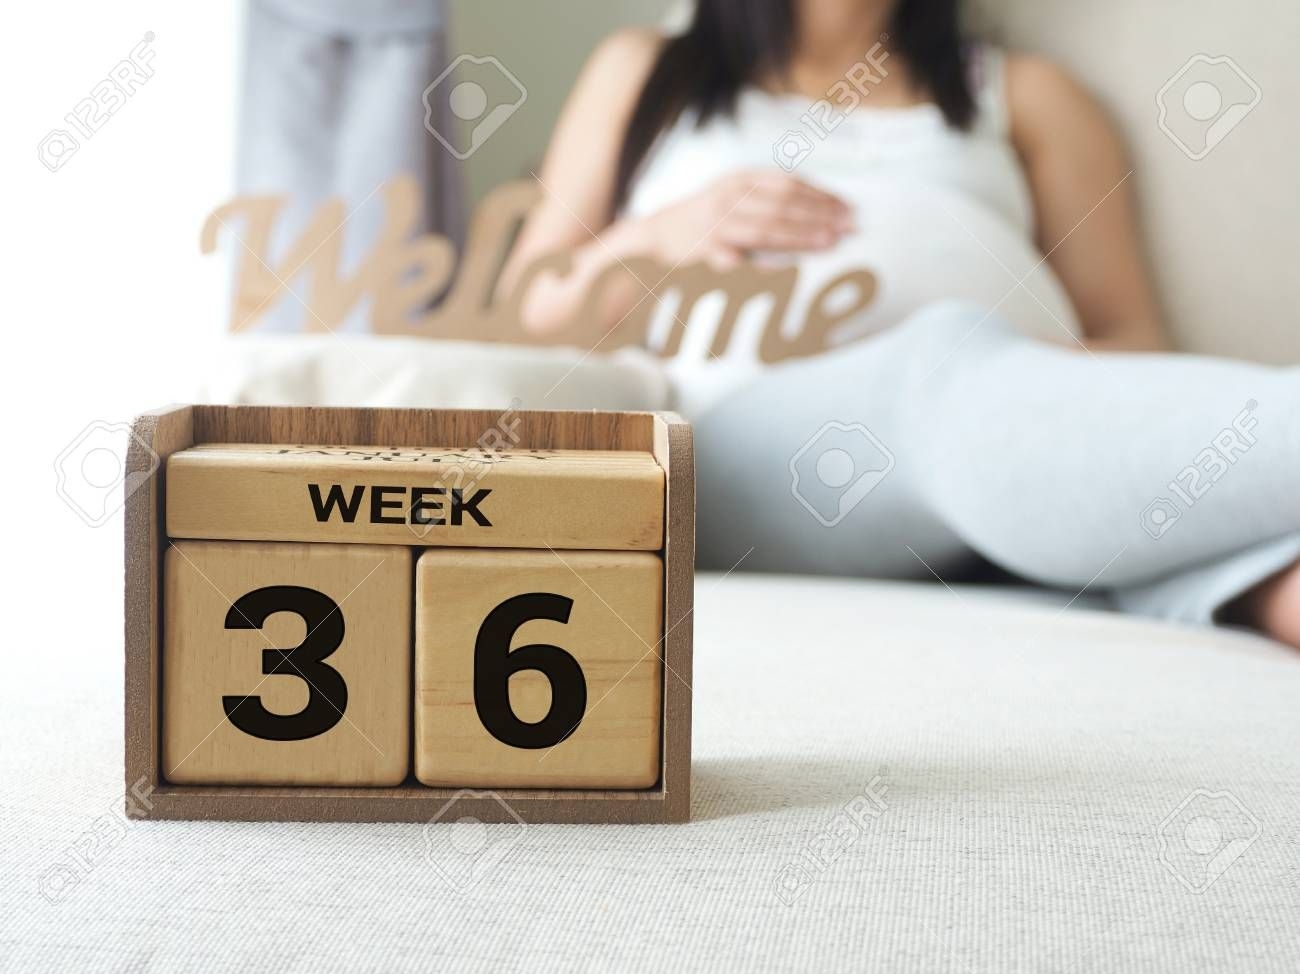 Calendar With Weeks 36 Of Pregnant With Pregnancy Woman Background